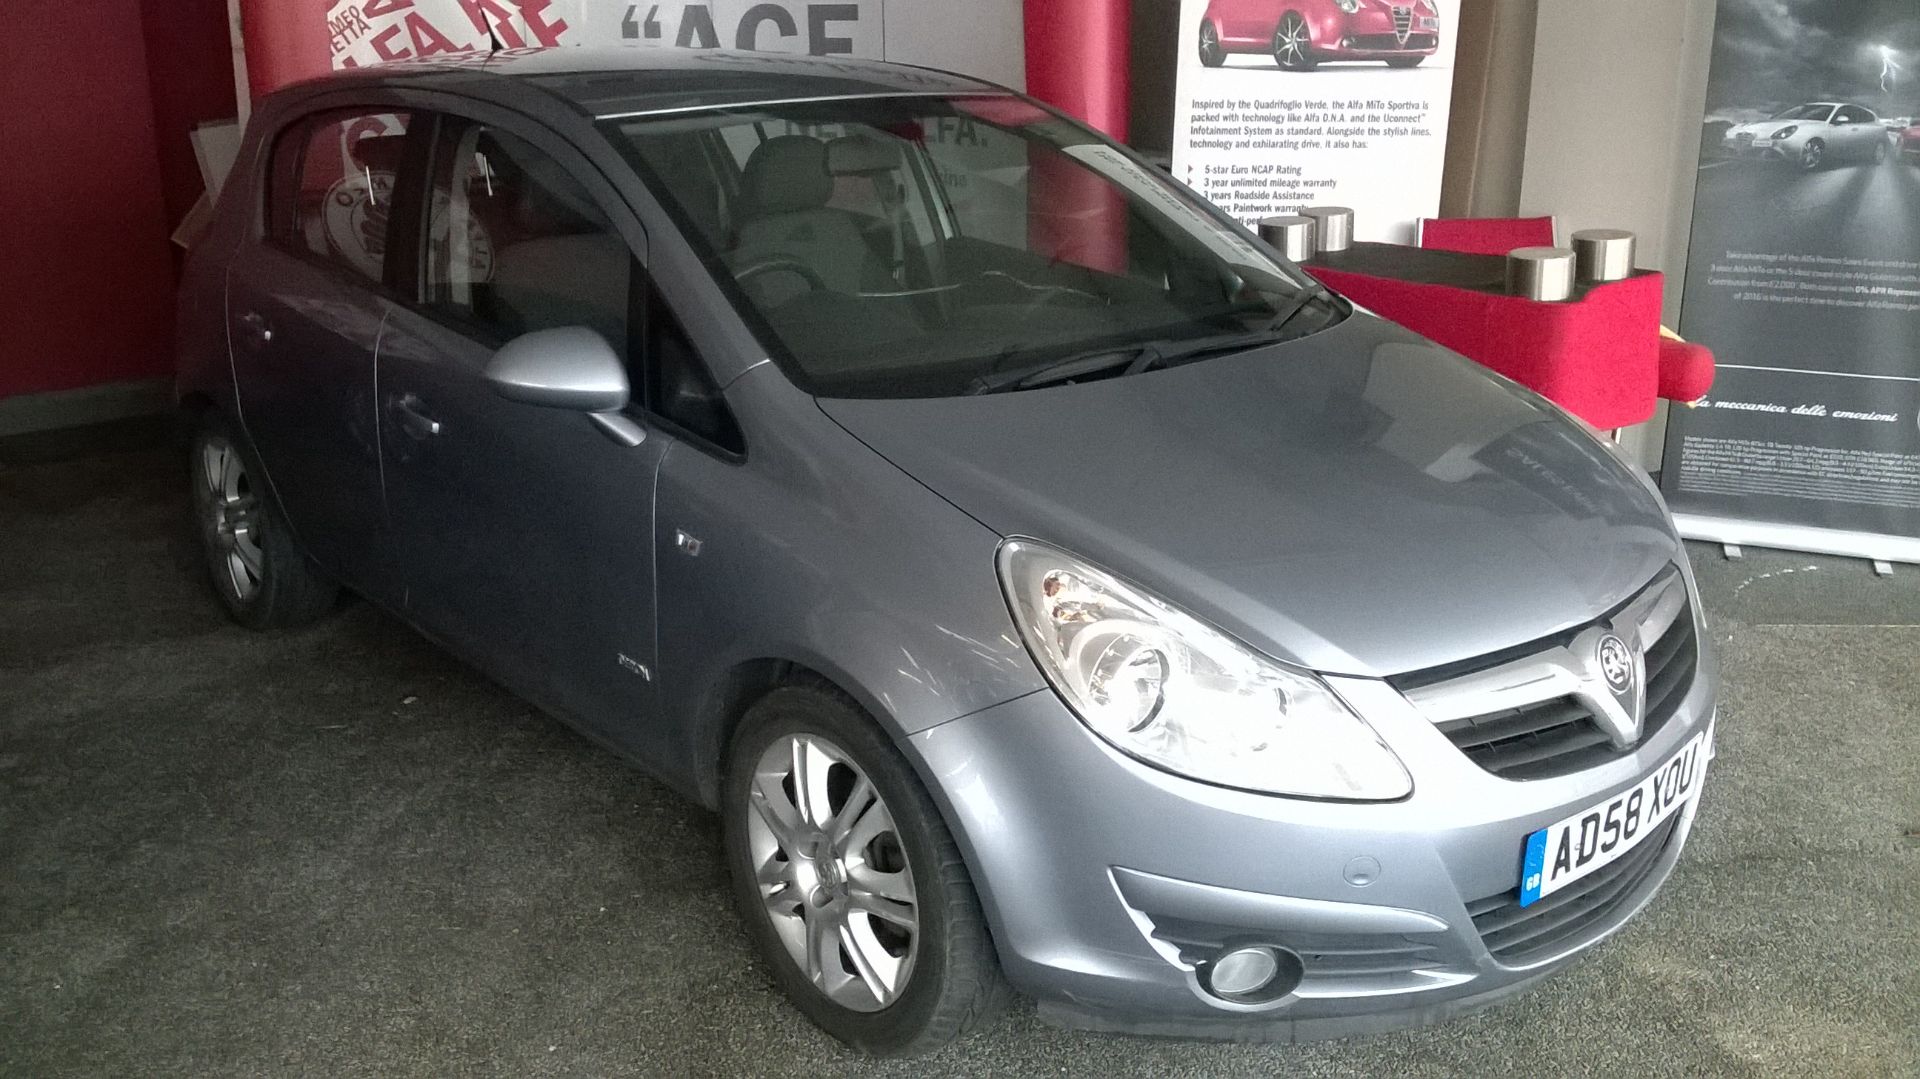 Vauxhall Corsa 1.2 Design Date First Registered: 21/10/2008 Registration: AD58 XOU Mileage: 46,779